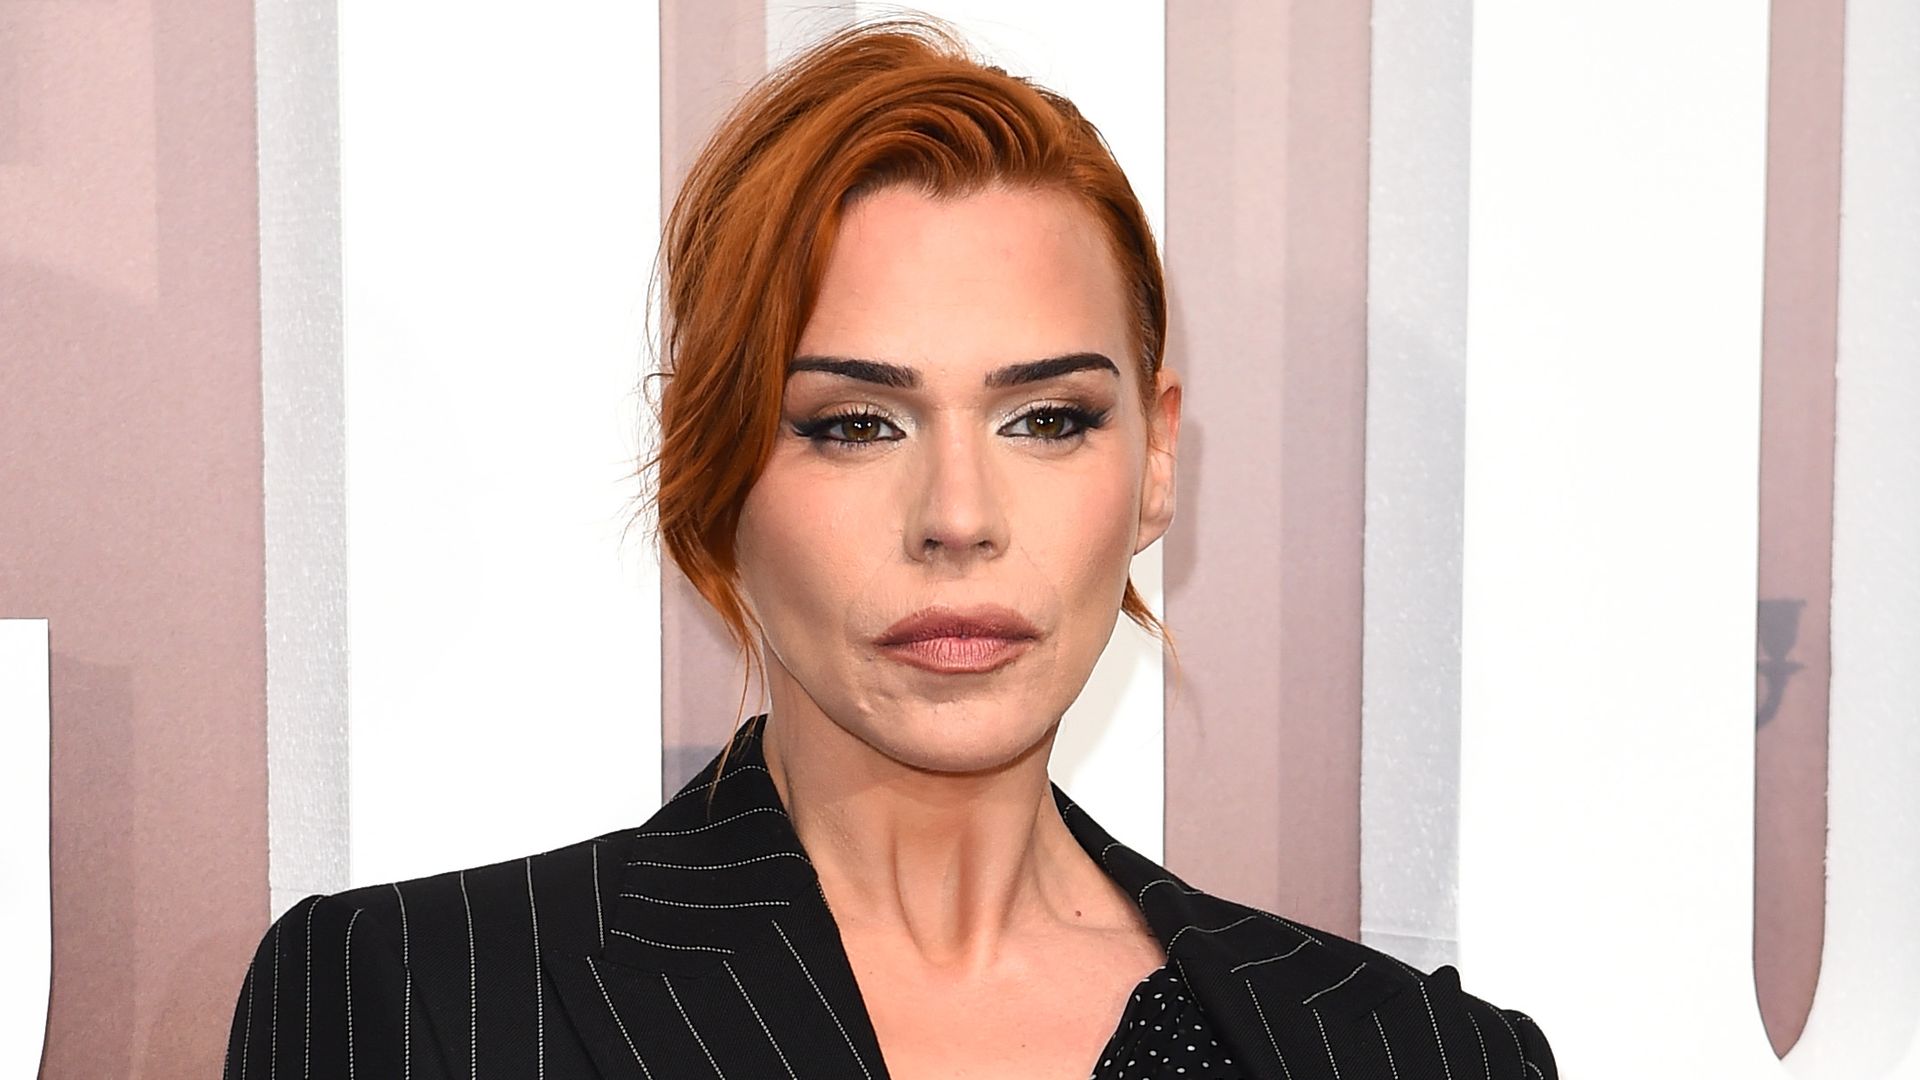 Billie Piper attends the world premiere of "Scoop" at The Curzon Mayfair on March 27, 2024 